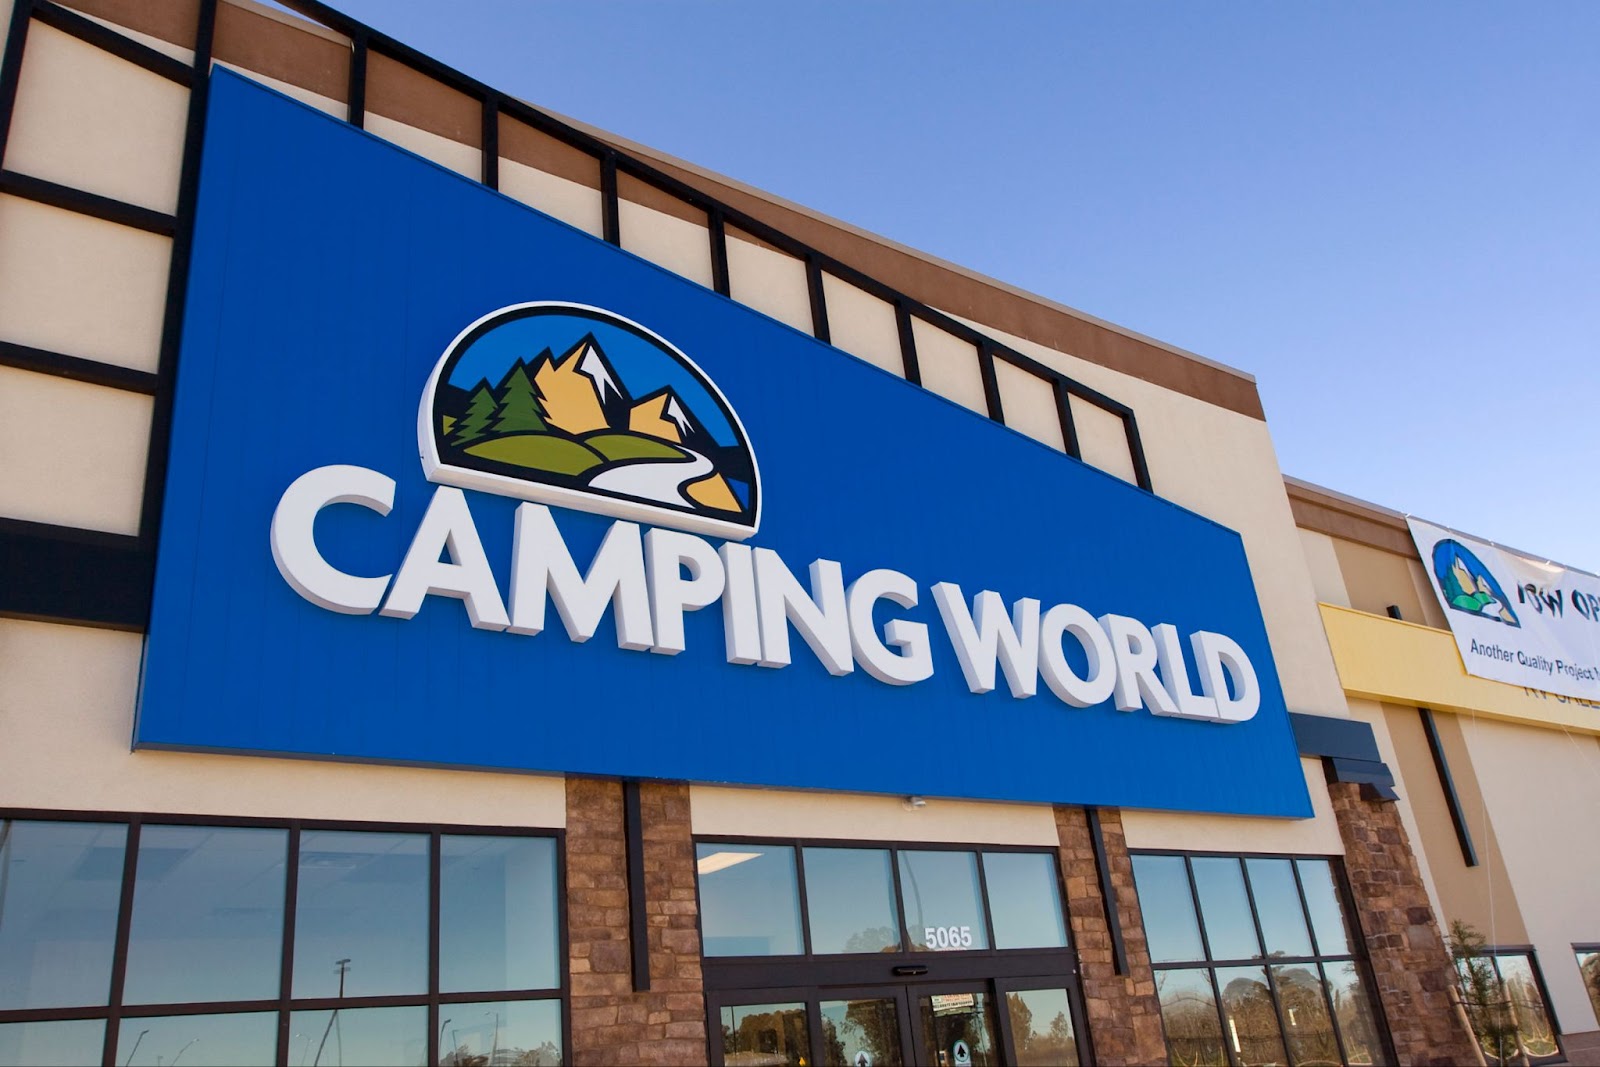 Camping World pre-engineered building